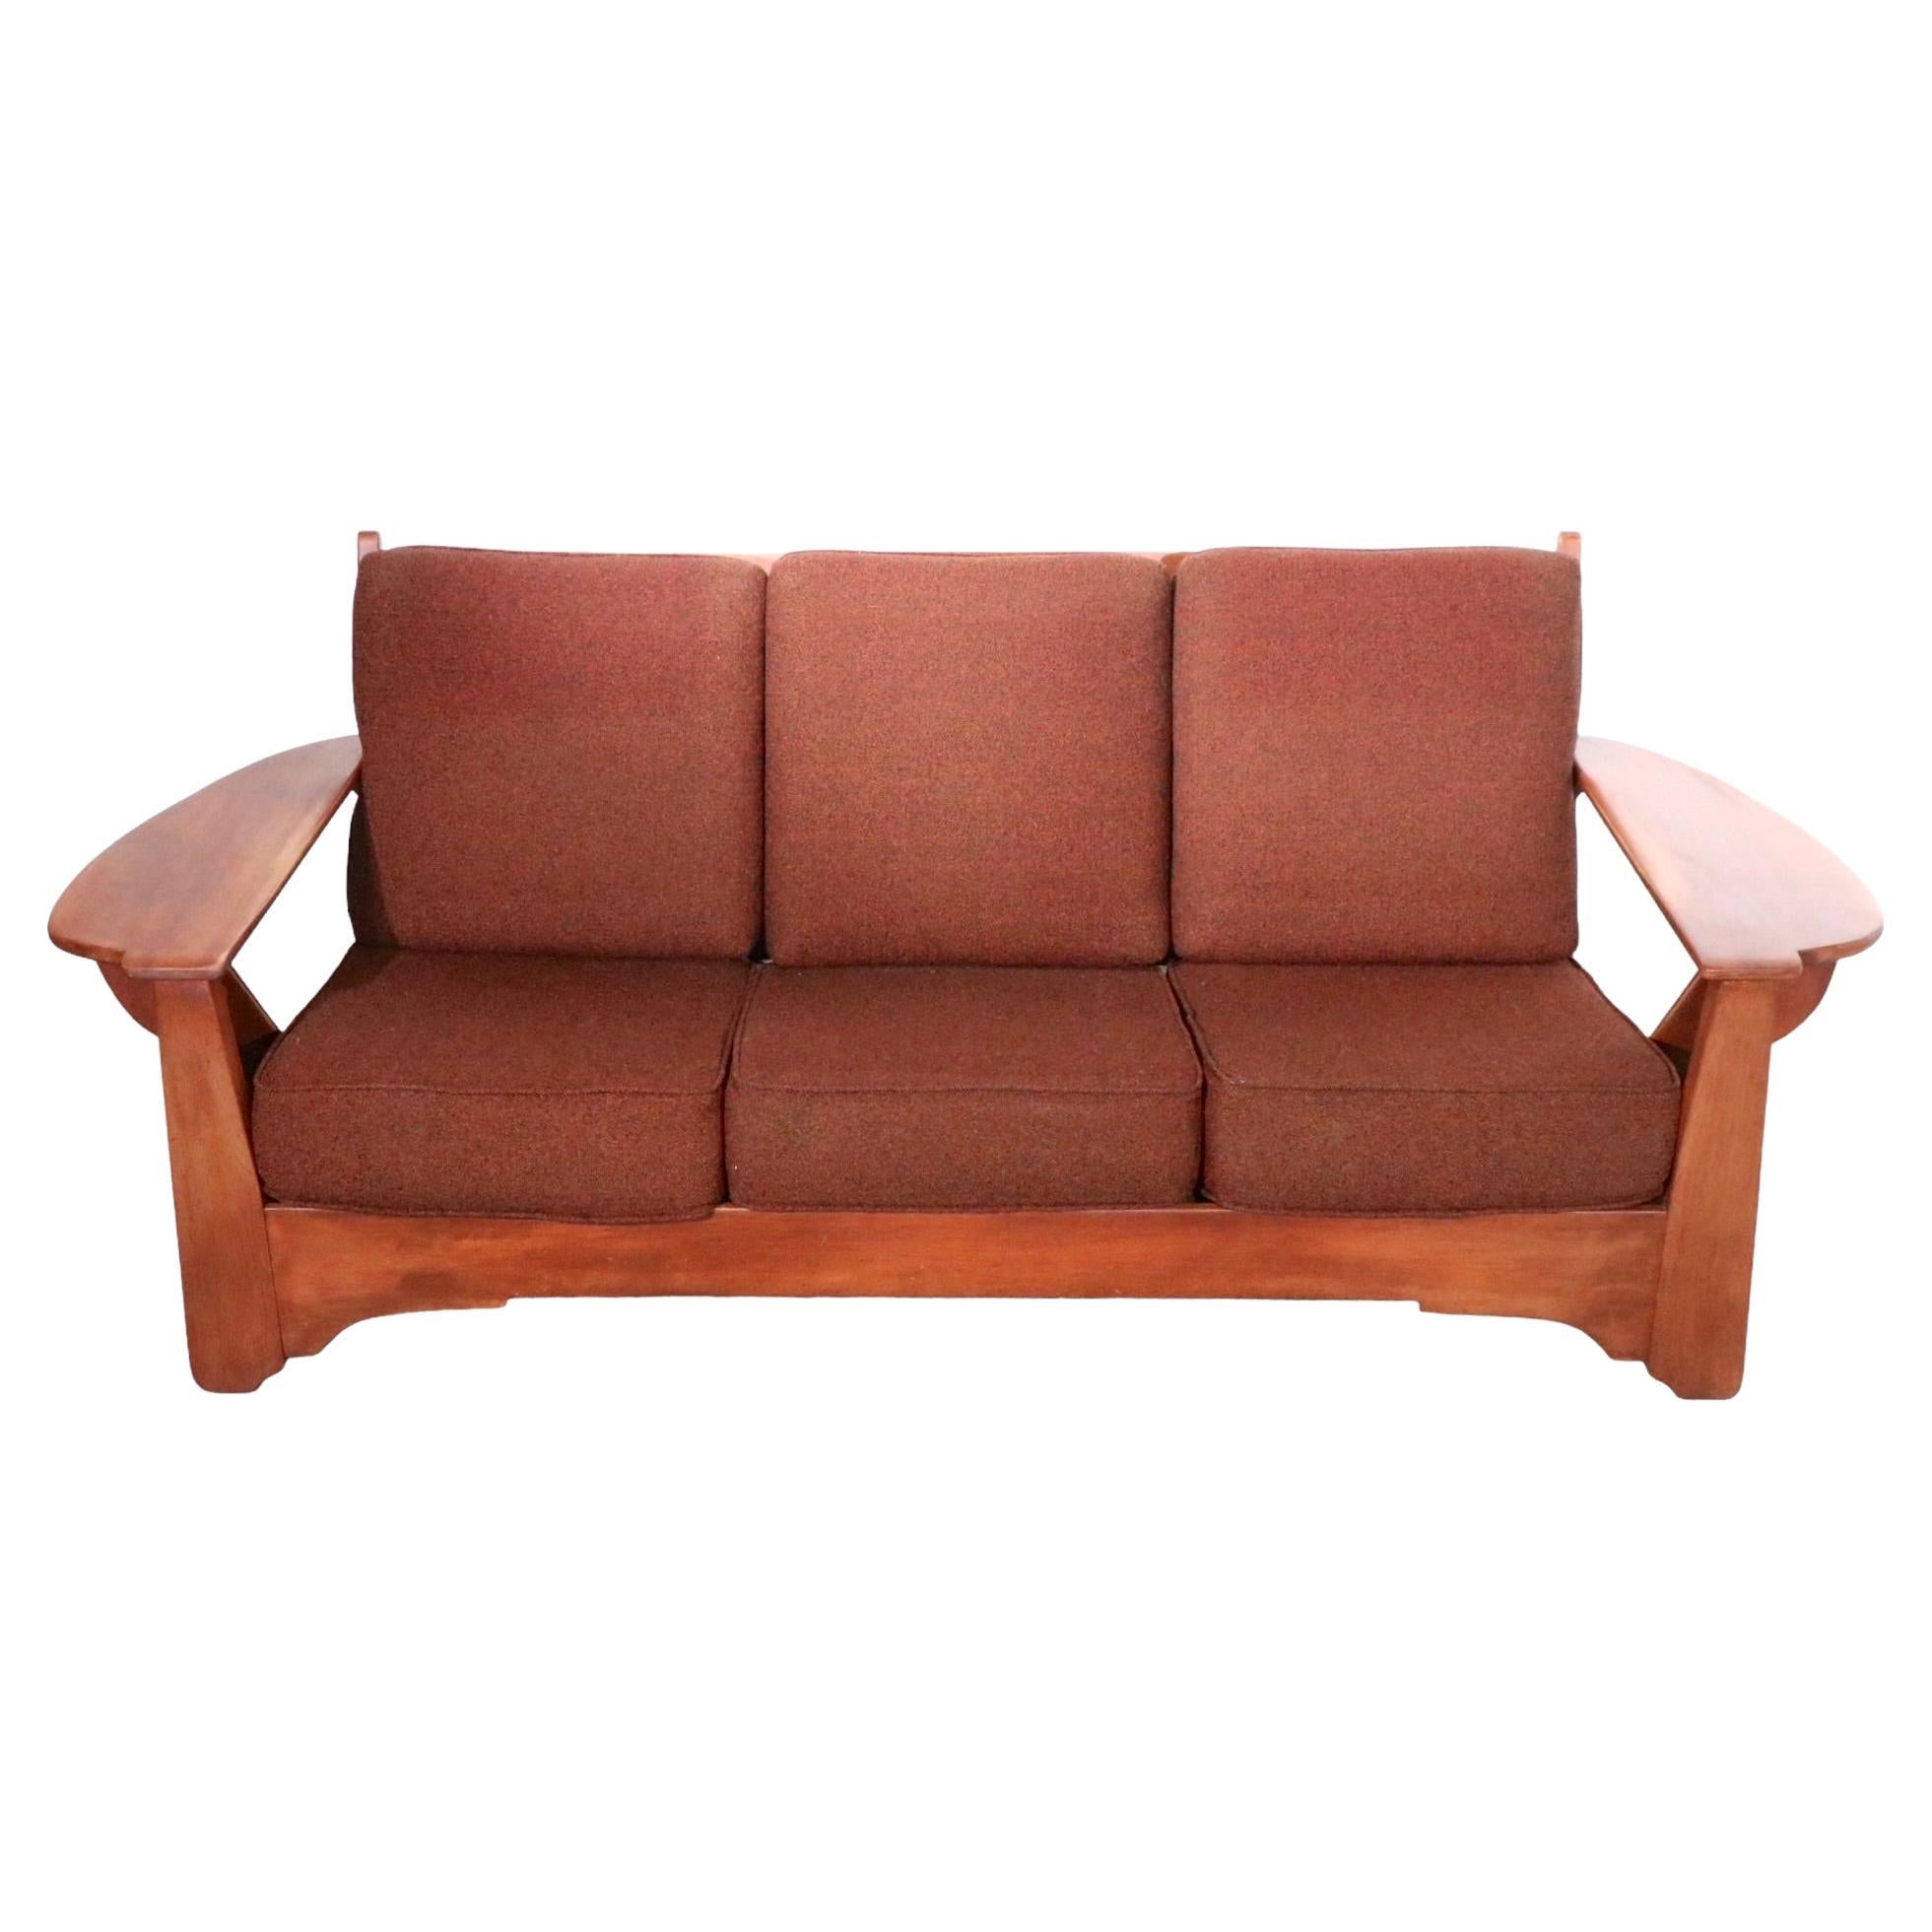 Paddle Arm Cushman Colonial Creations Sofa designed by Herman de Vries 1940s/50s